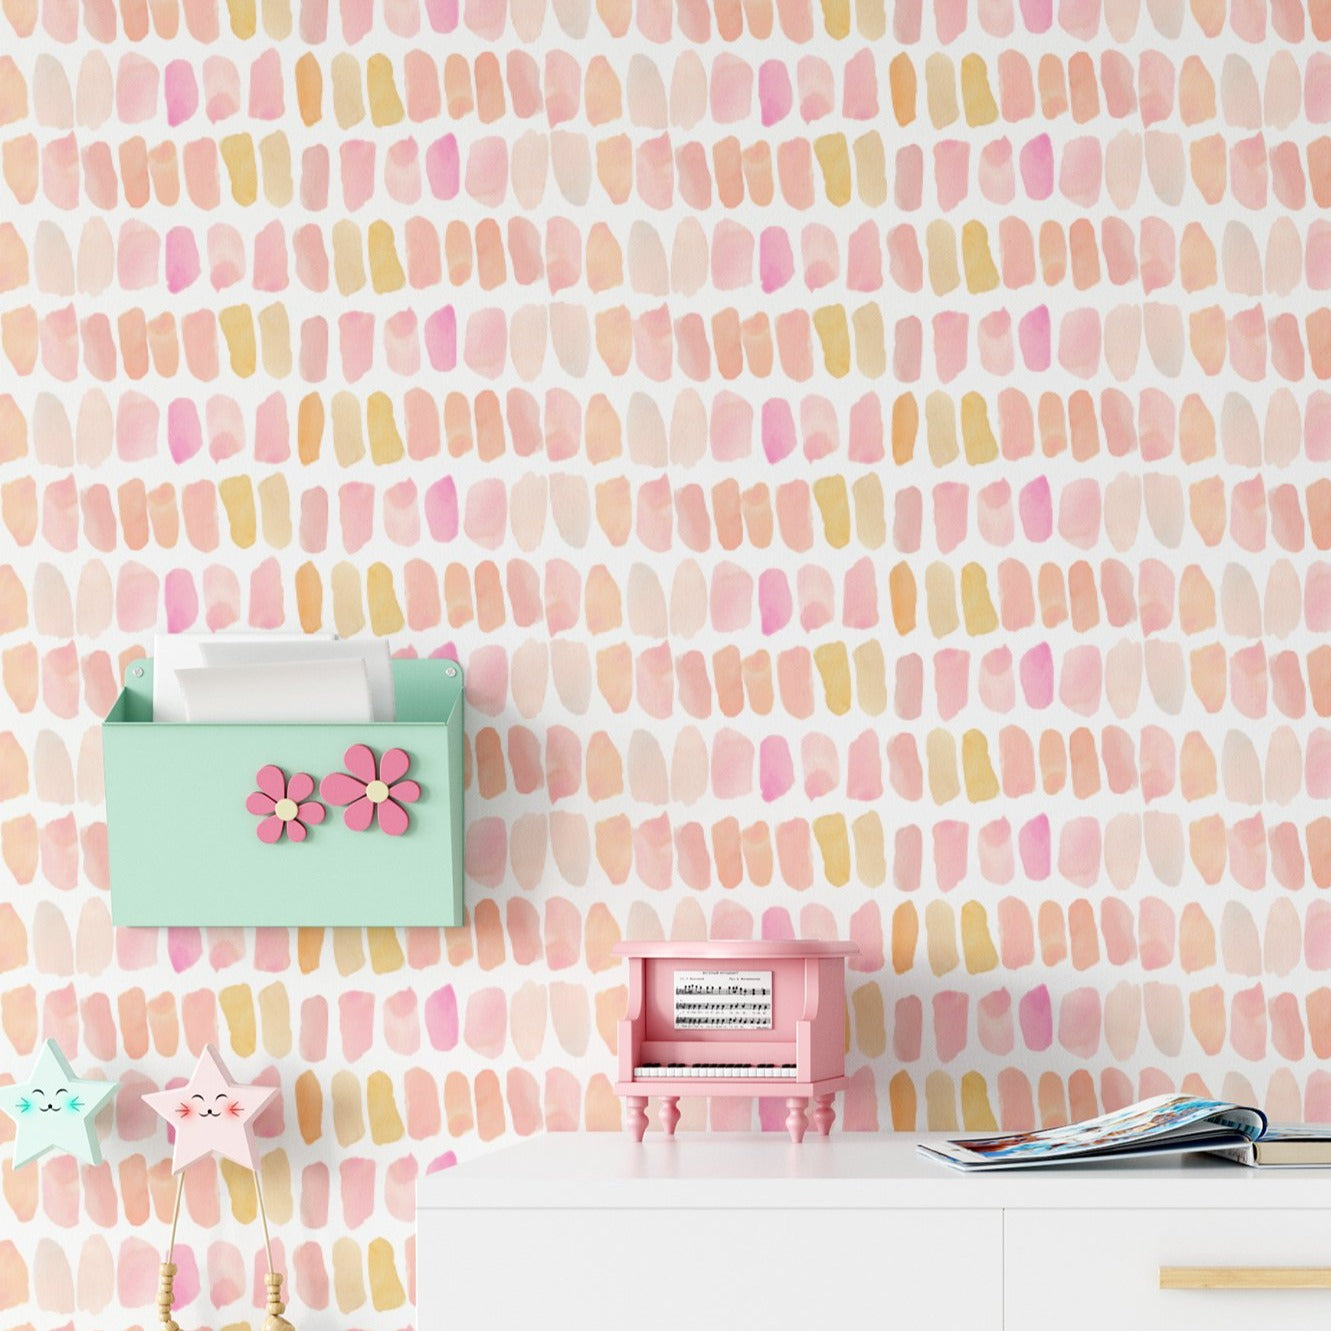 A vibrant and colorful interior scene featuring a wall covered in a hand-painted wallpaper with an array of pastel pink, peach, and yellow dashes. The scene includes a pink toy piano, a green mail organizer with pink flower decorations, and various children's toys, enhancing the playful and creative atmosphere of the room.